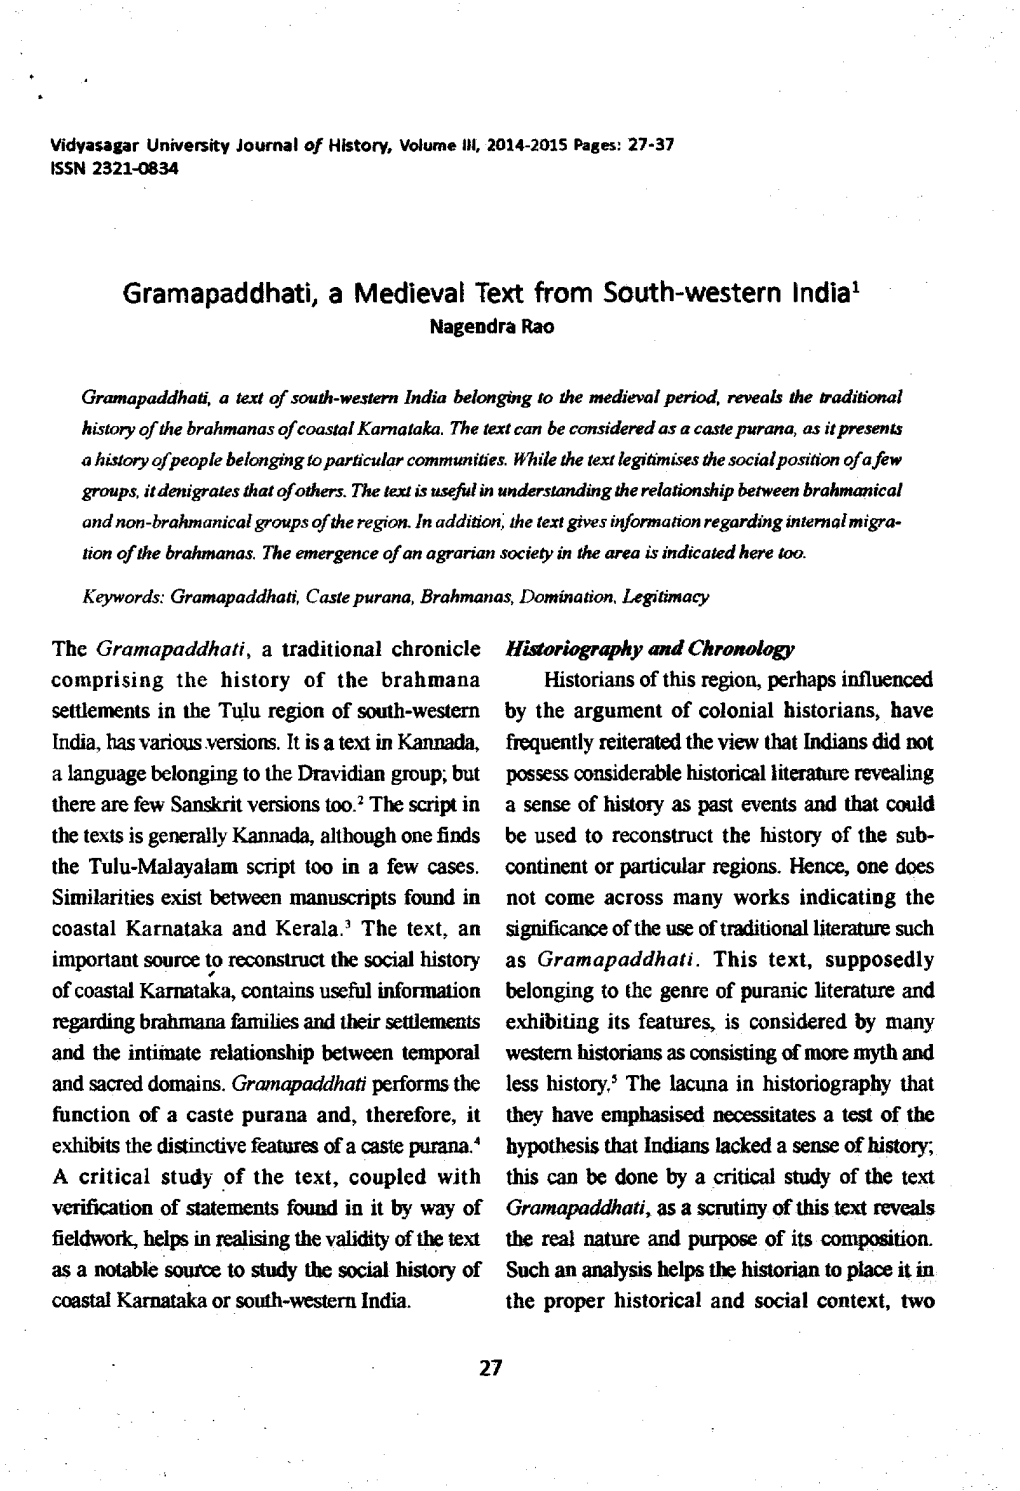 Gramapaddhati, a Medieval Text from South-Western India1 Nagendra Rao